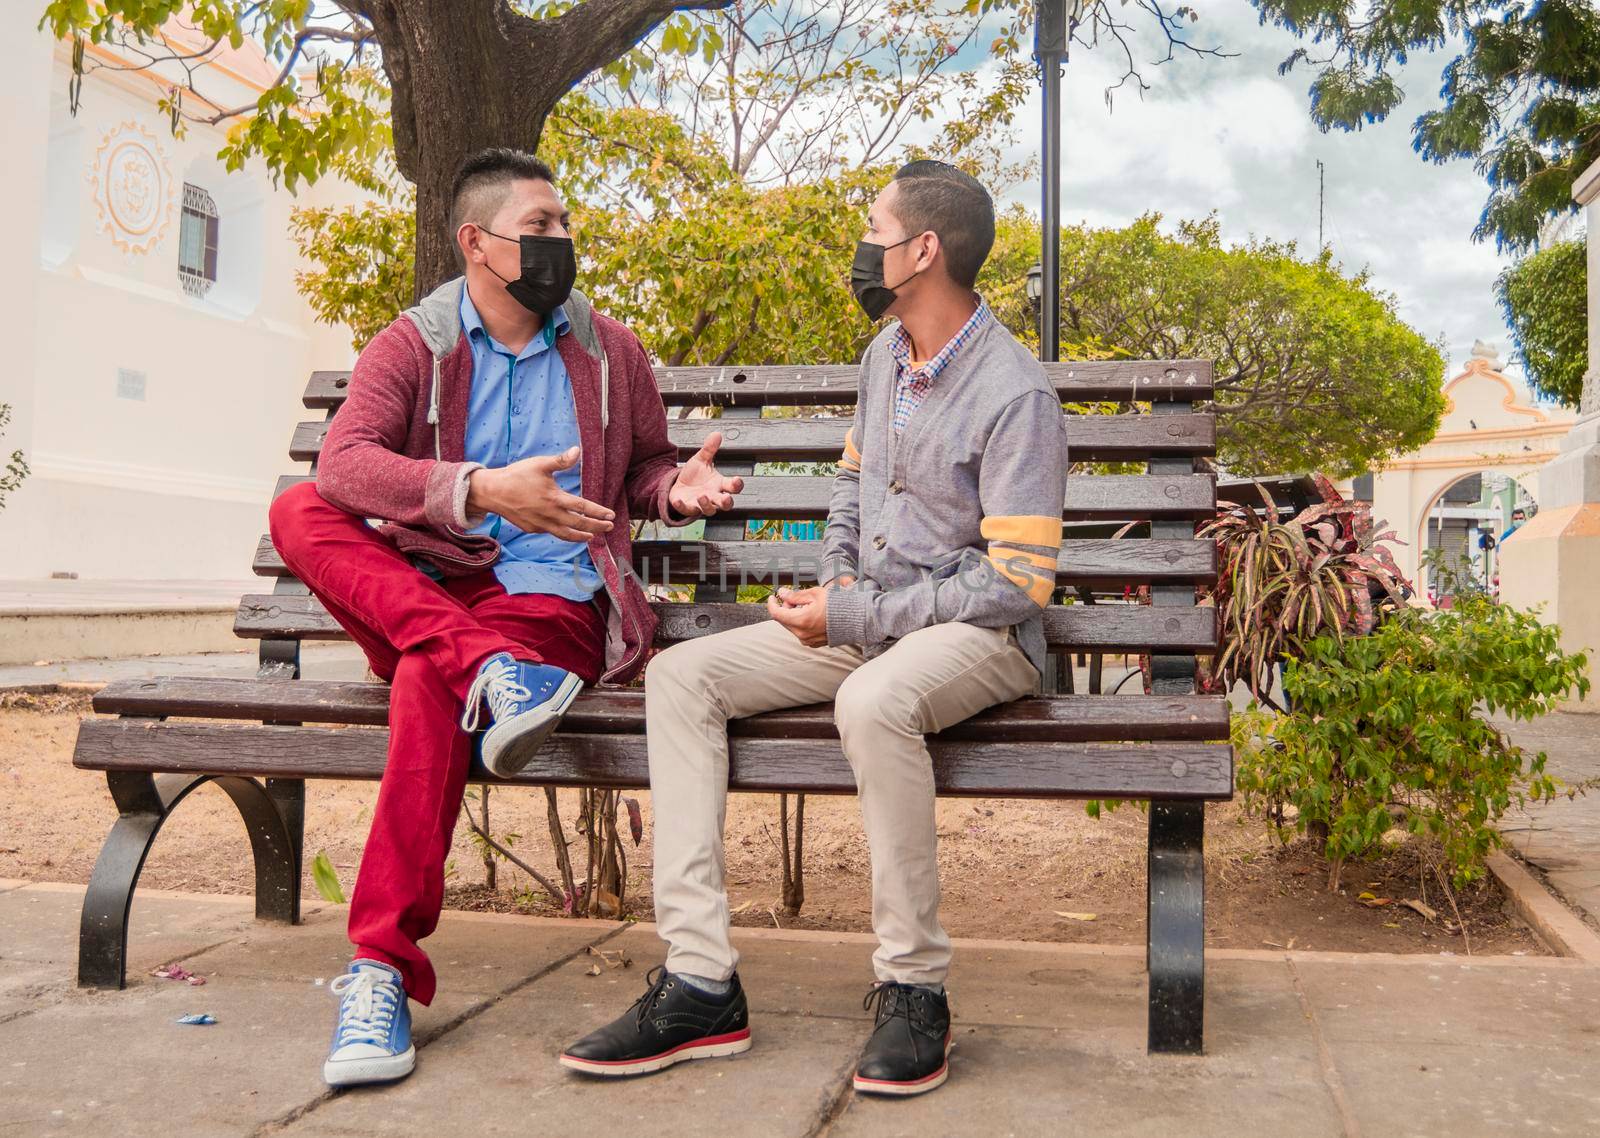 Two men with masks talking on a bench, men with social distance talking on a bench